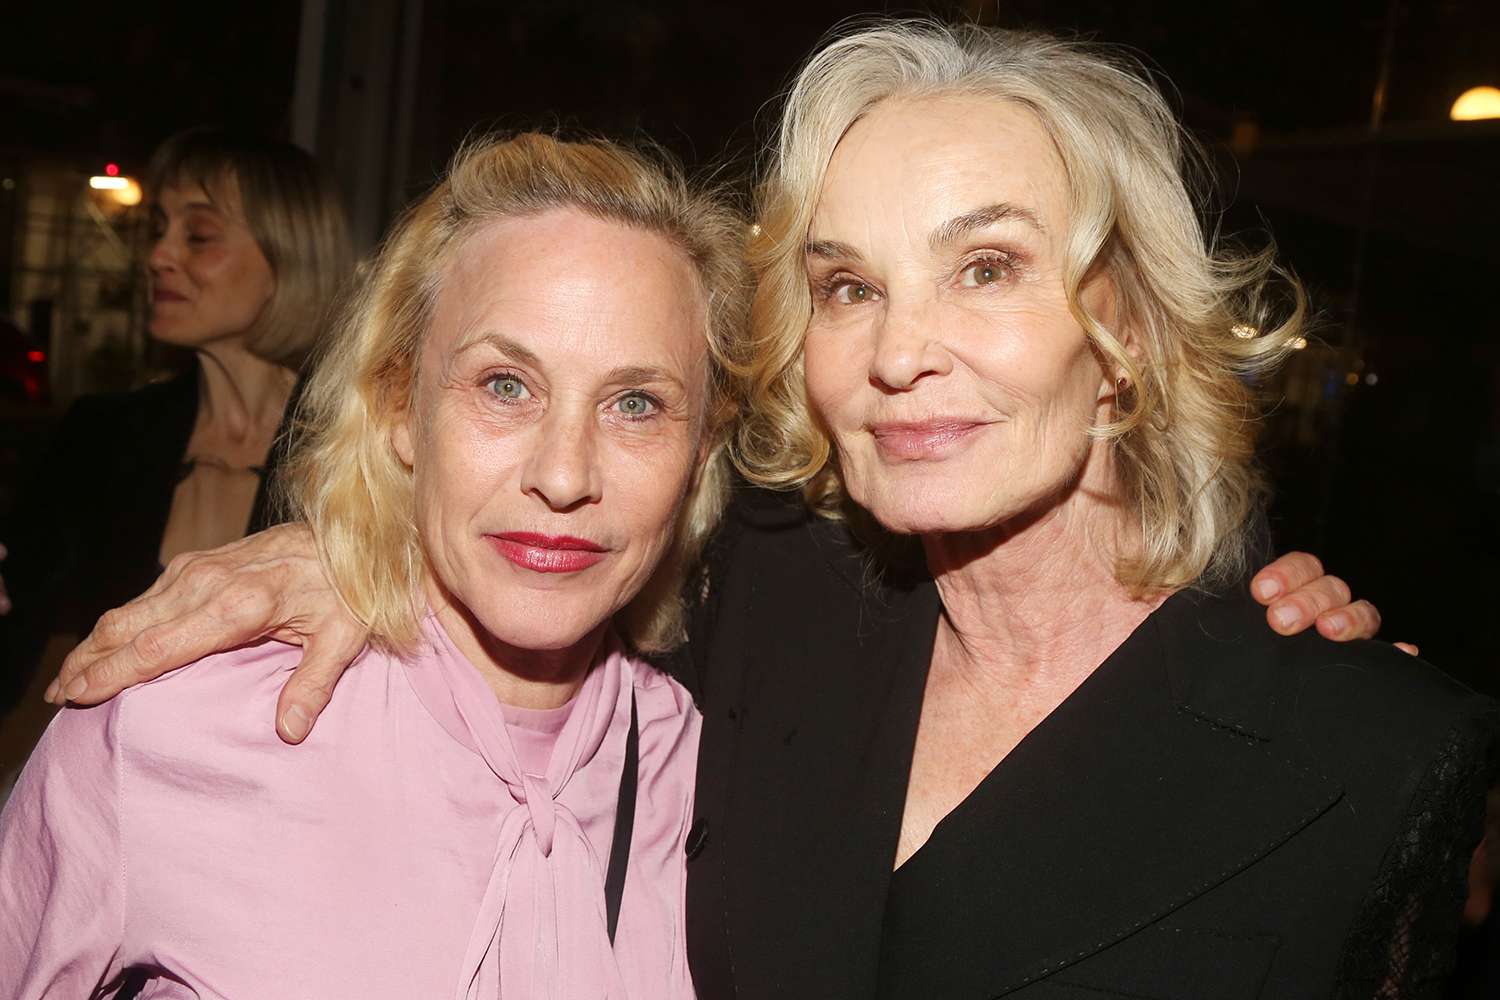 Patricia Arquette and Jessica Lange pose at the opening night after party for the new Second Stage Theater play "Mother Play" on Broadway